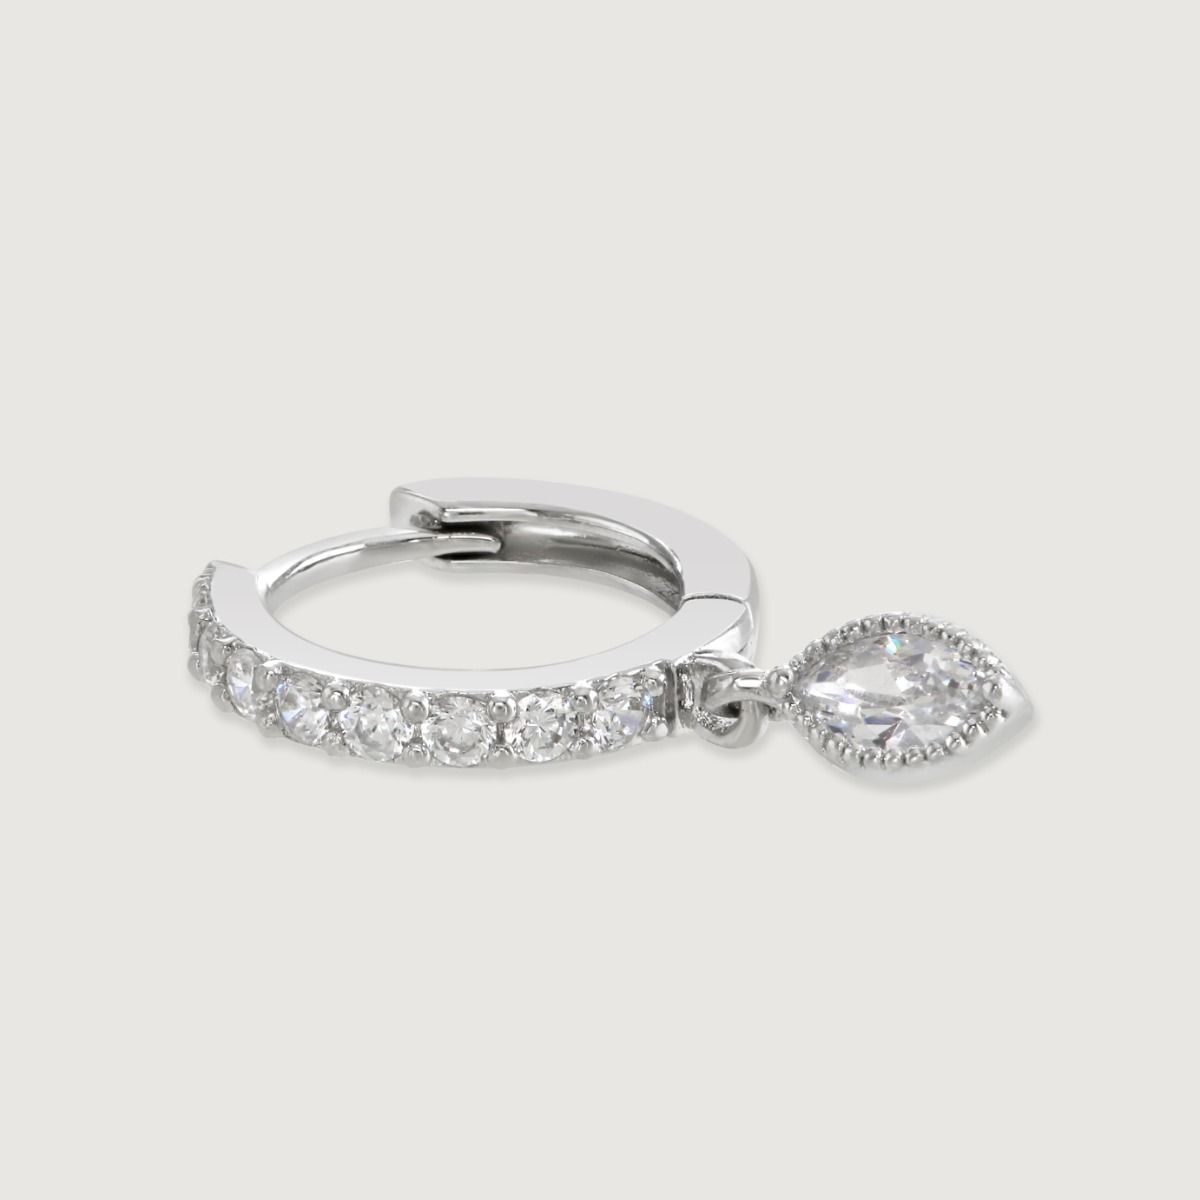 Elevate your elegance with the Silver Marquise Diamond Hoop Earrings. Its encrusted cubic zirconia hoops glisten, accentuating a captivating marquise drop. An exquisite blend of sophistication and charm for any occasion.